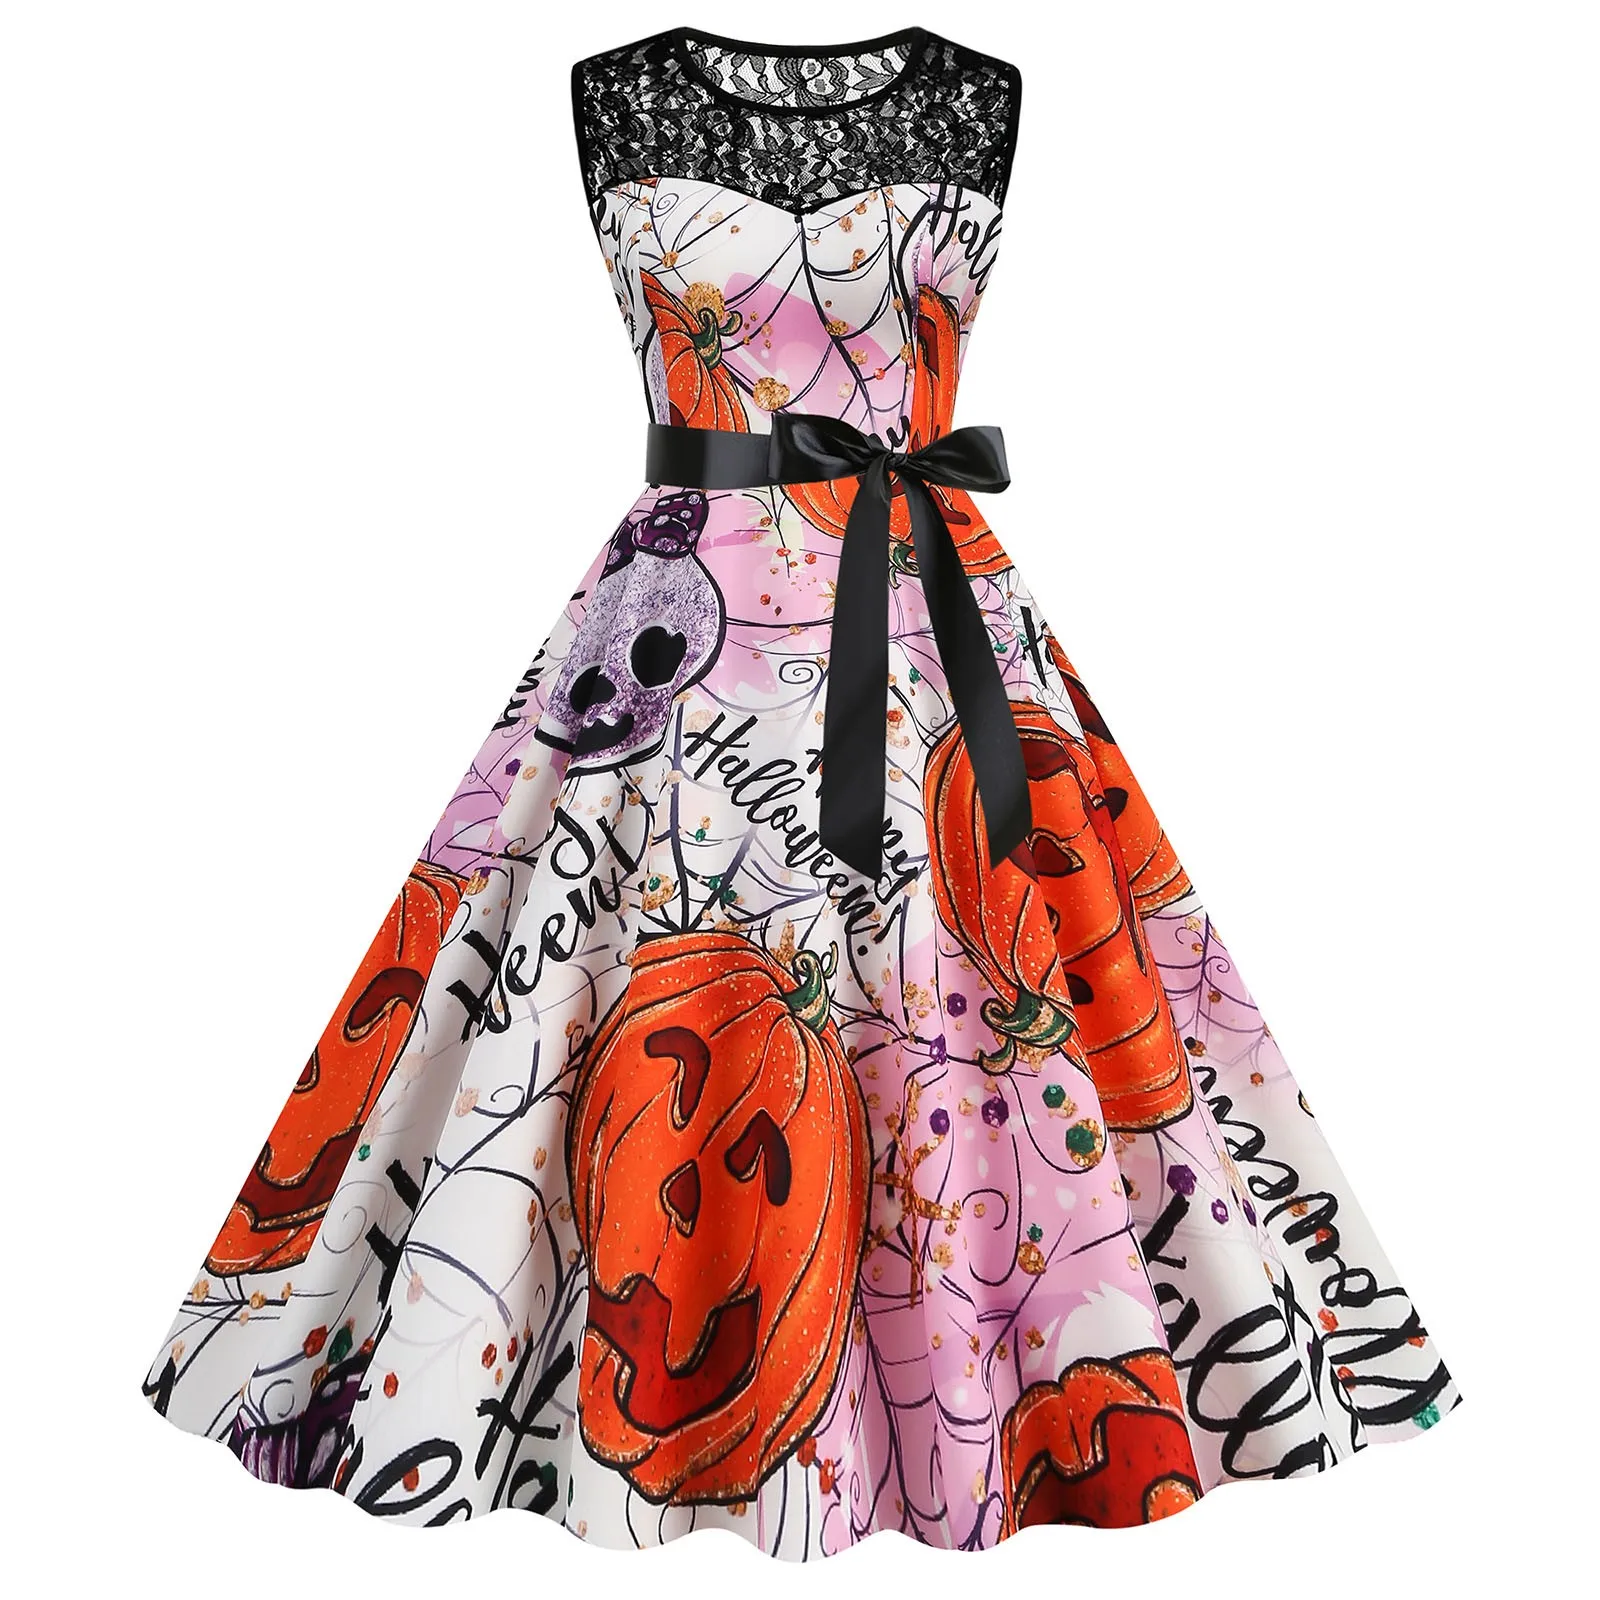 

Women Sleeveless Lace Dress Halloween Pumpkin Printed Vintage Cosplay Cocktail Party Swing Dresses Halloween Costumes For Women